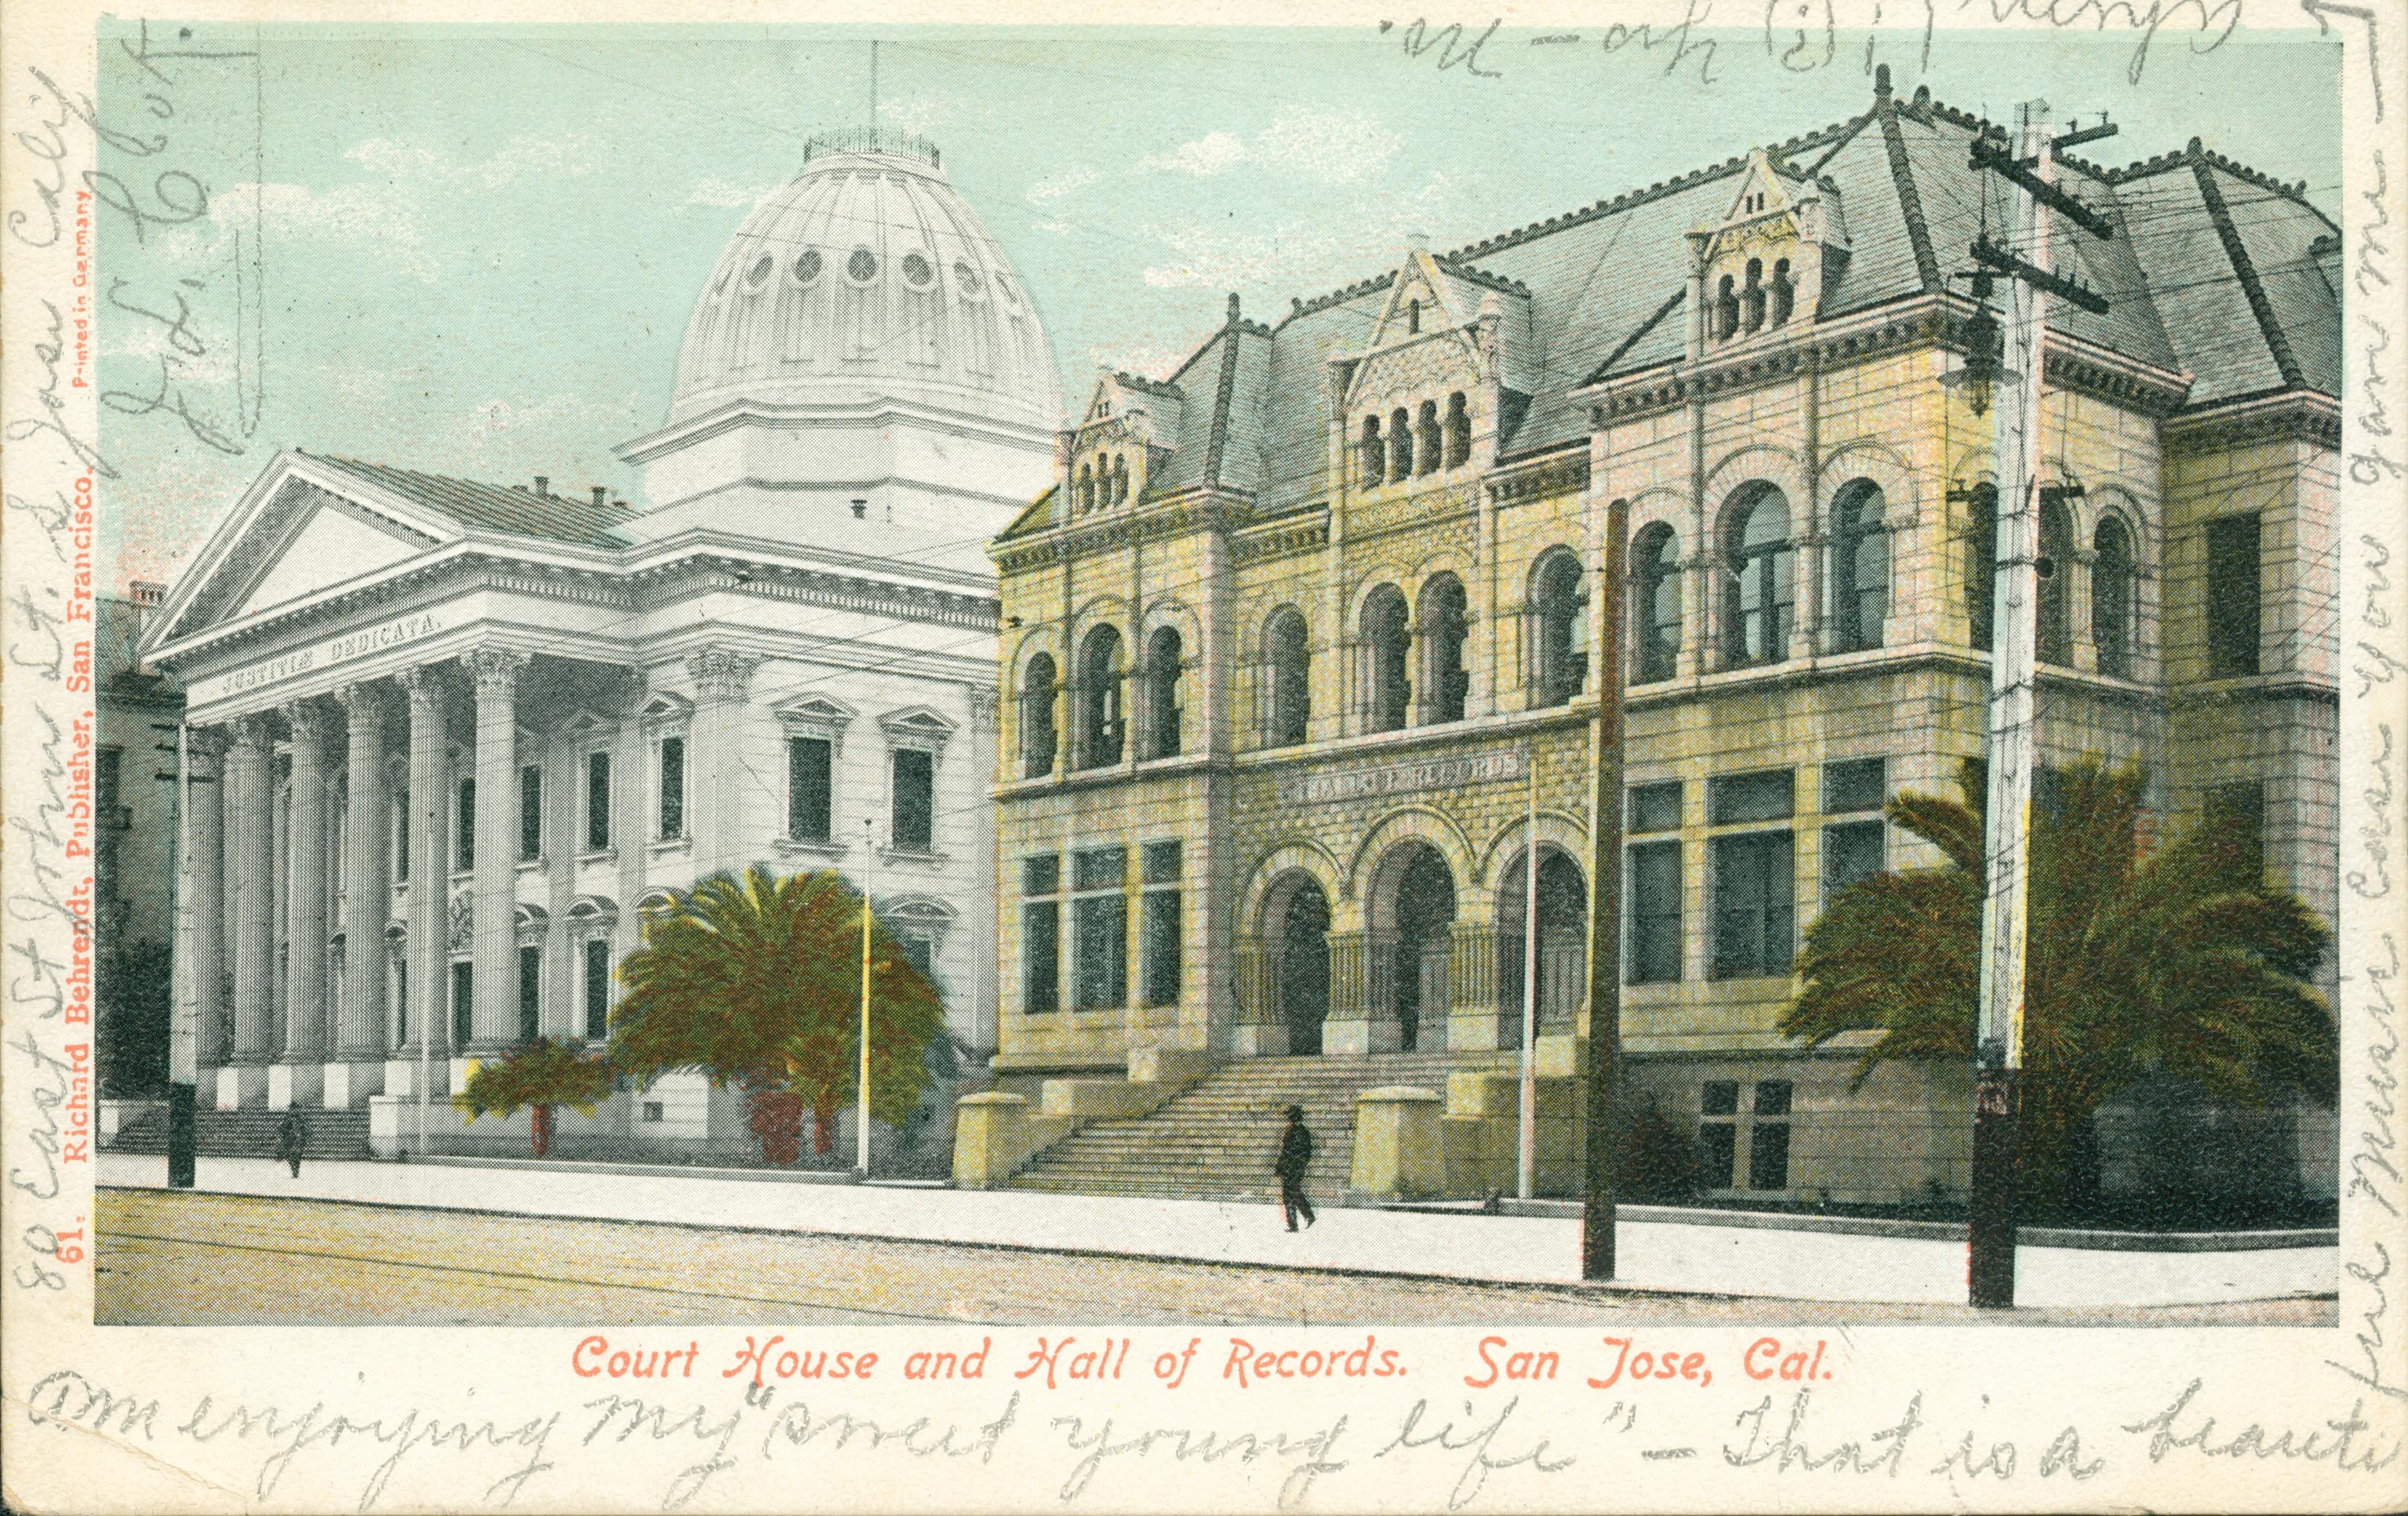 Exterior view of the Court House and Hall of Records